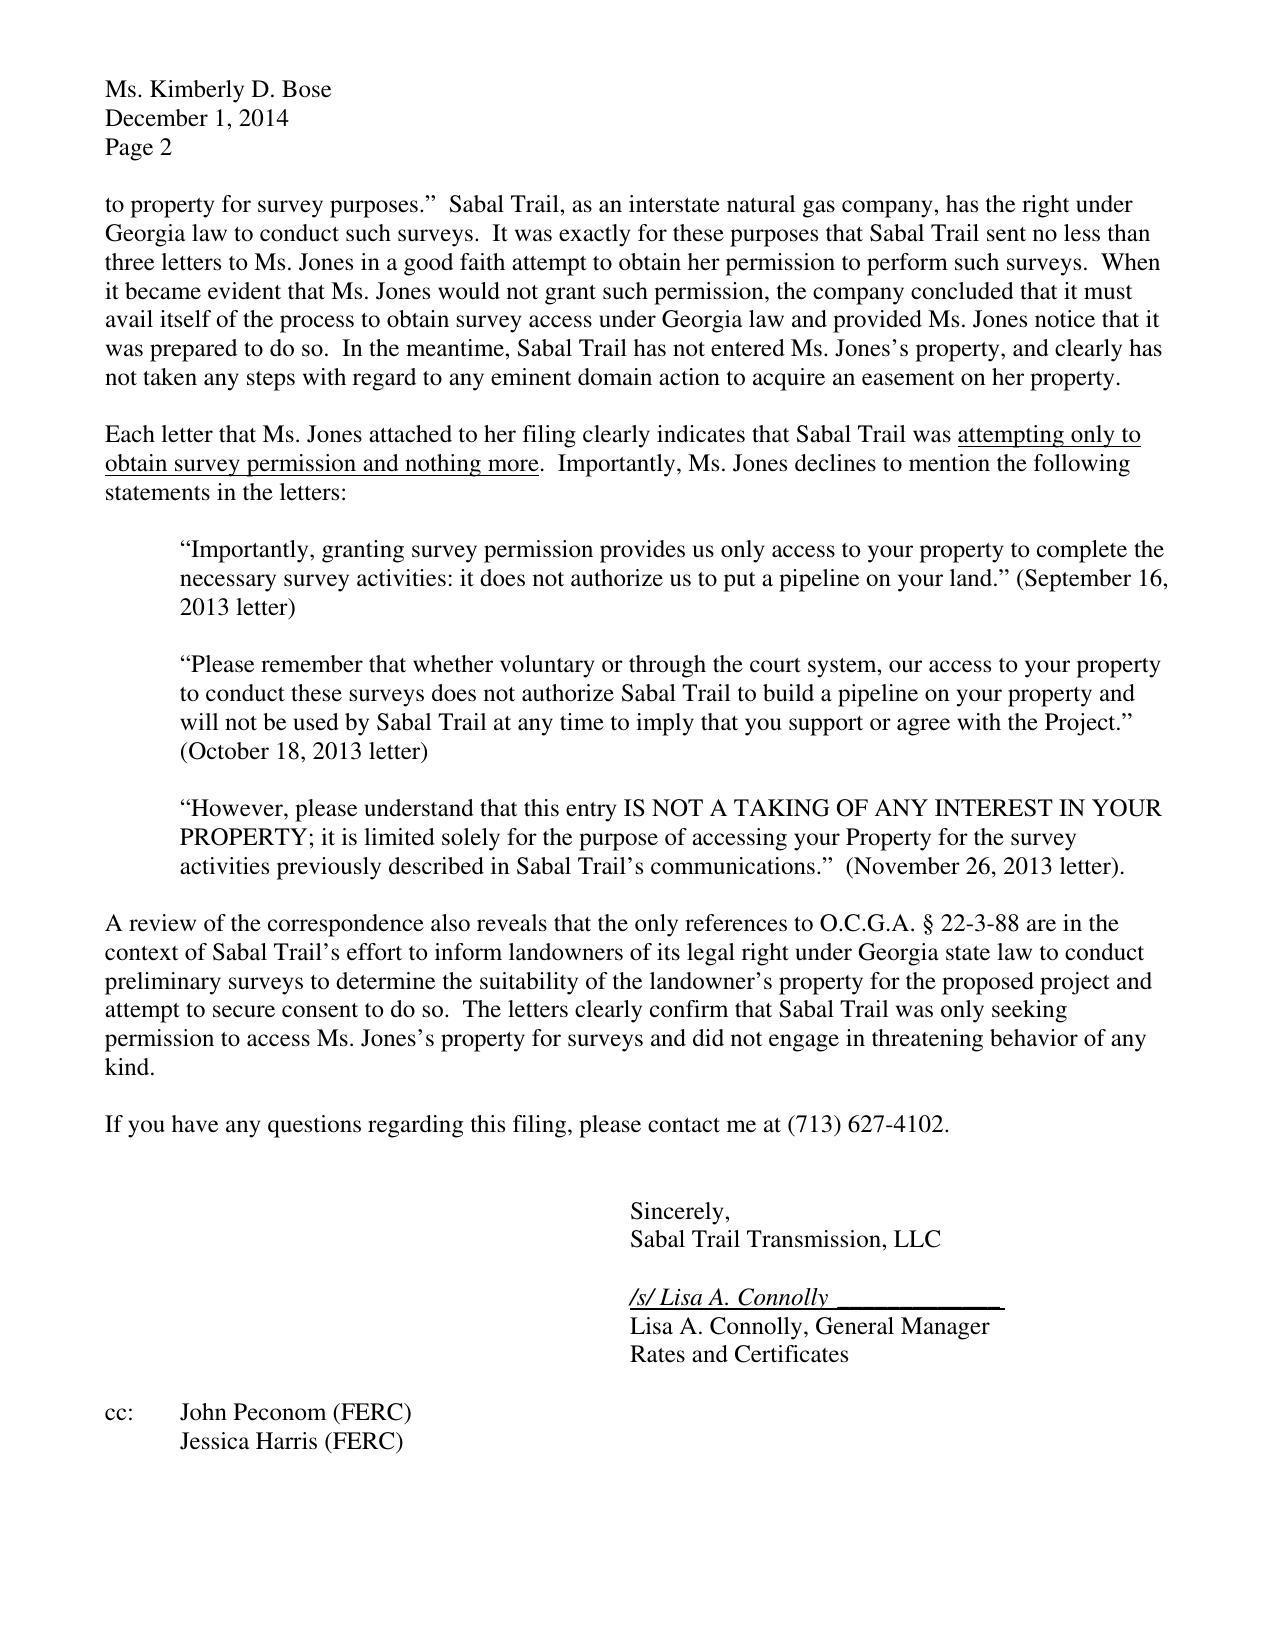 1275x1650 Trespass isnt a taking? Page 2 of 2, in Sabal trail strikes back, by Lisa A. Connolly, for SpectraBusters.org, 1 December 2014